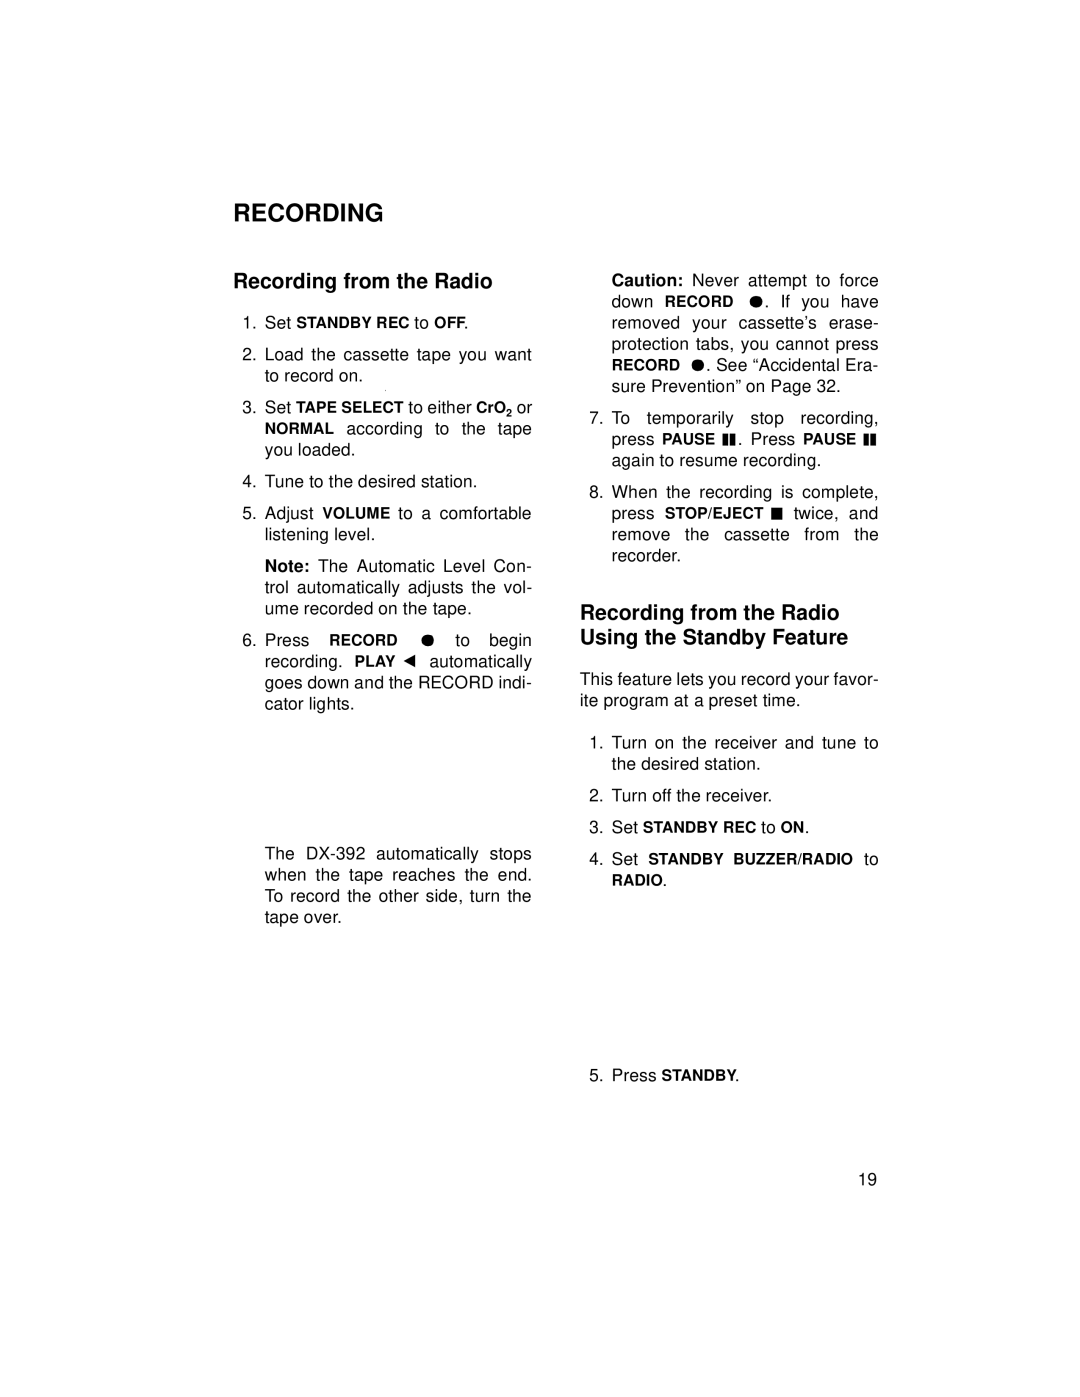 Radio Shack DX-392 owner manual Recording from the Radio Using the Standby Feature 